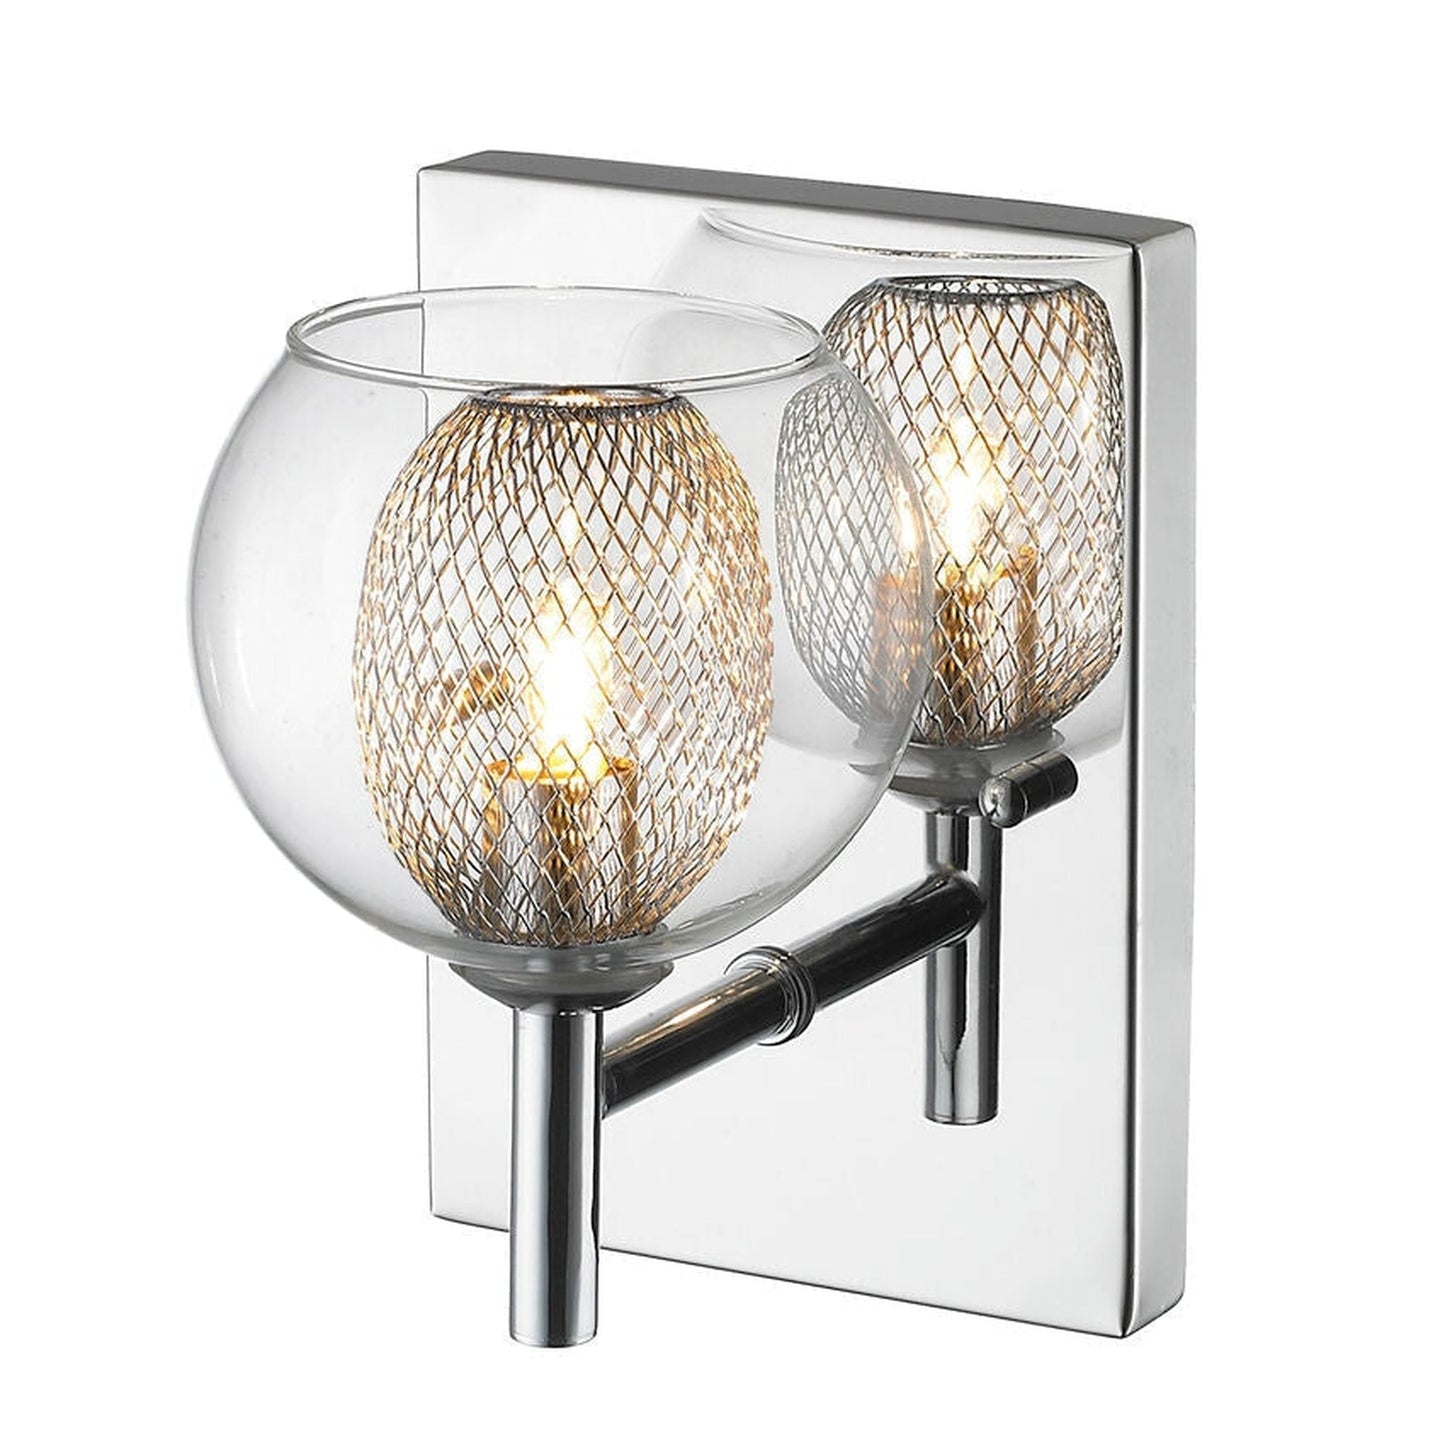 Z-Lite Auge 6" 1-Light Chrome Wall Sconce With Clear Glass and Steel Mesh Shade